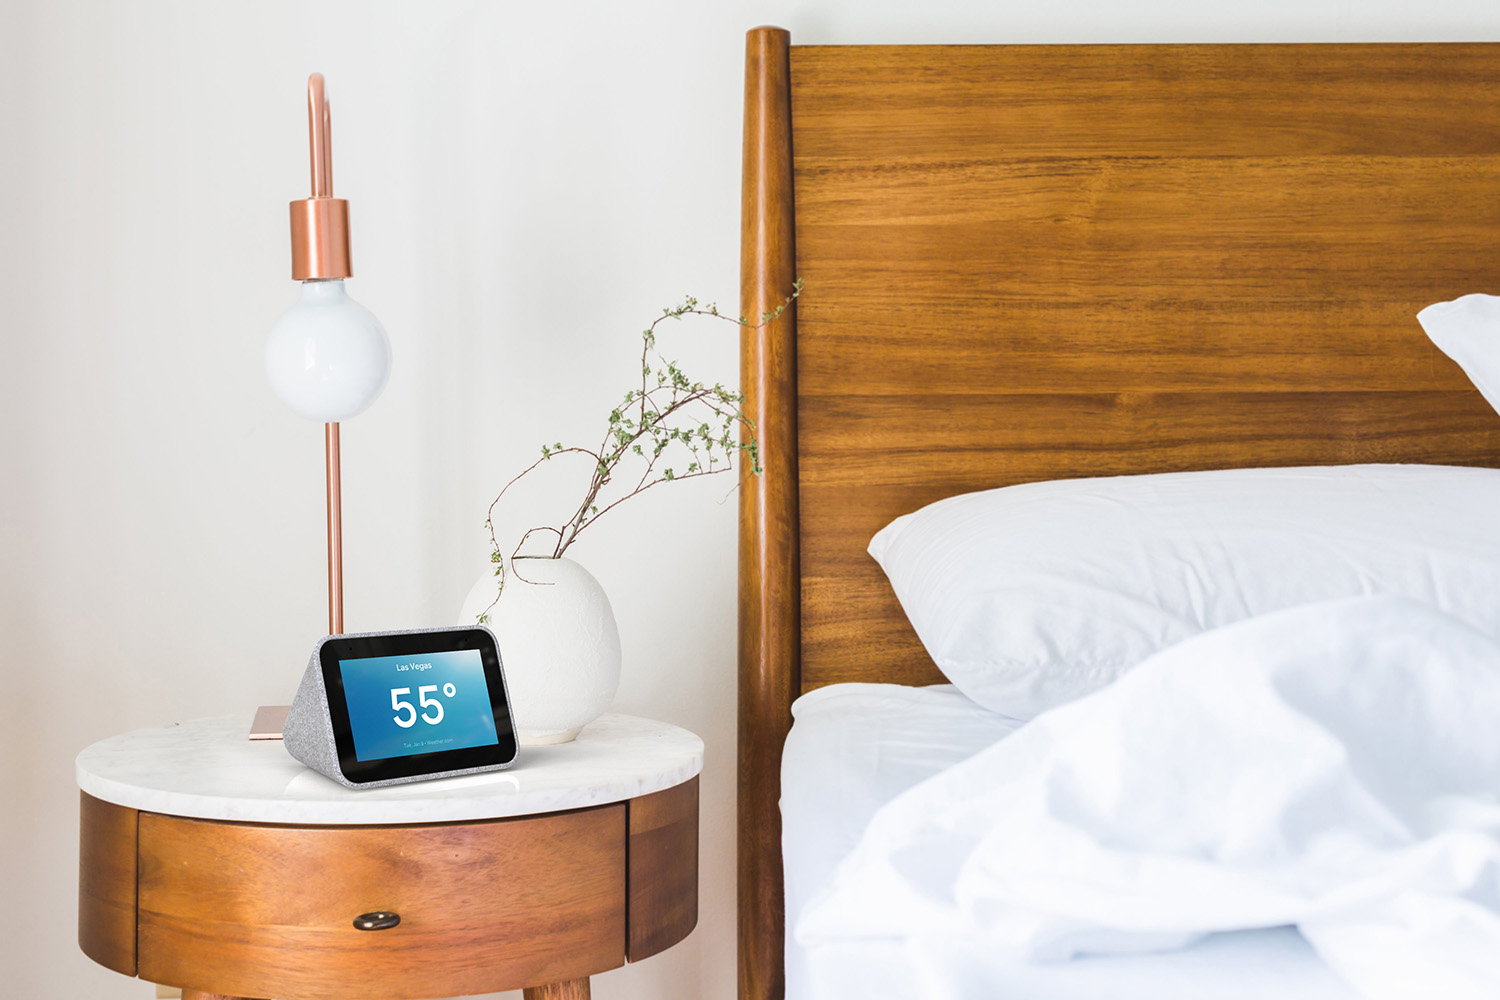 Lenovo is bringing Google Assistant to an alarm clock